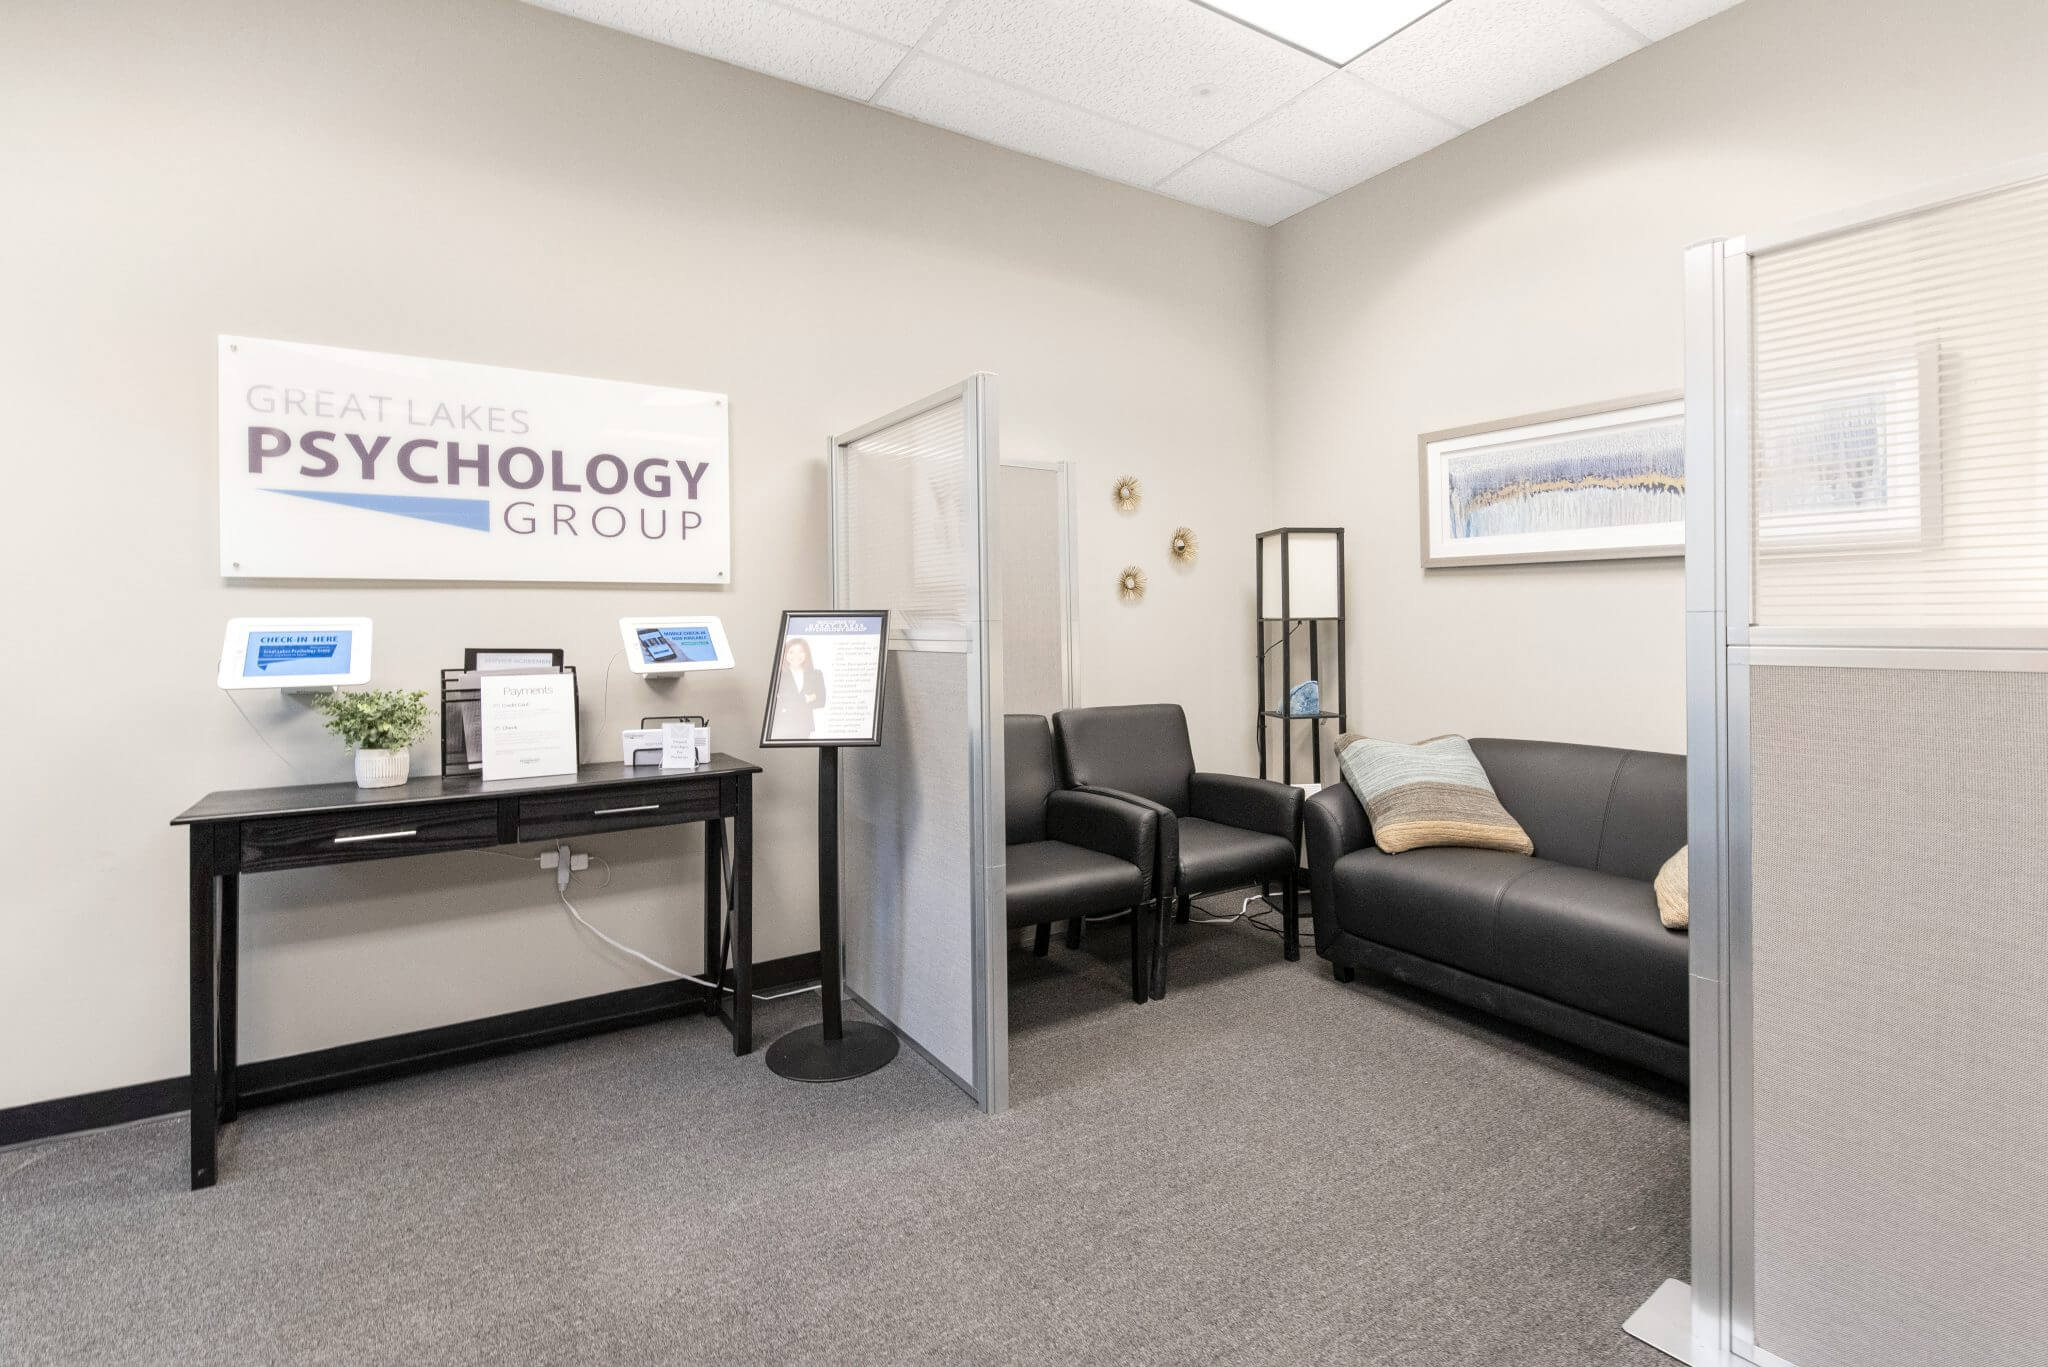 Glpg Great Lakes Psychology Group Counseling Therapy Naperville Illinois Kiosk